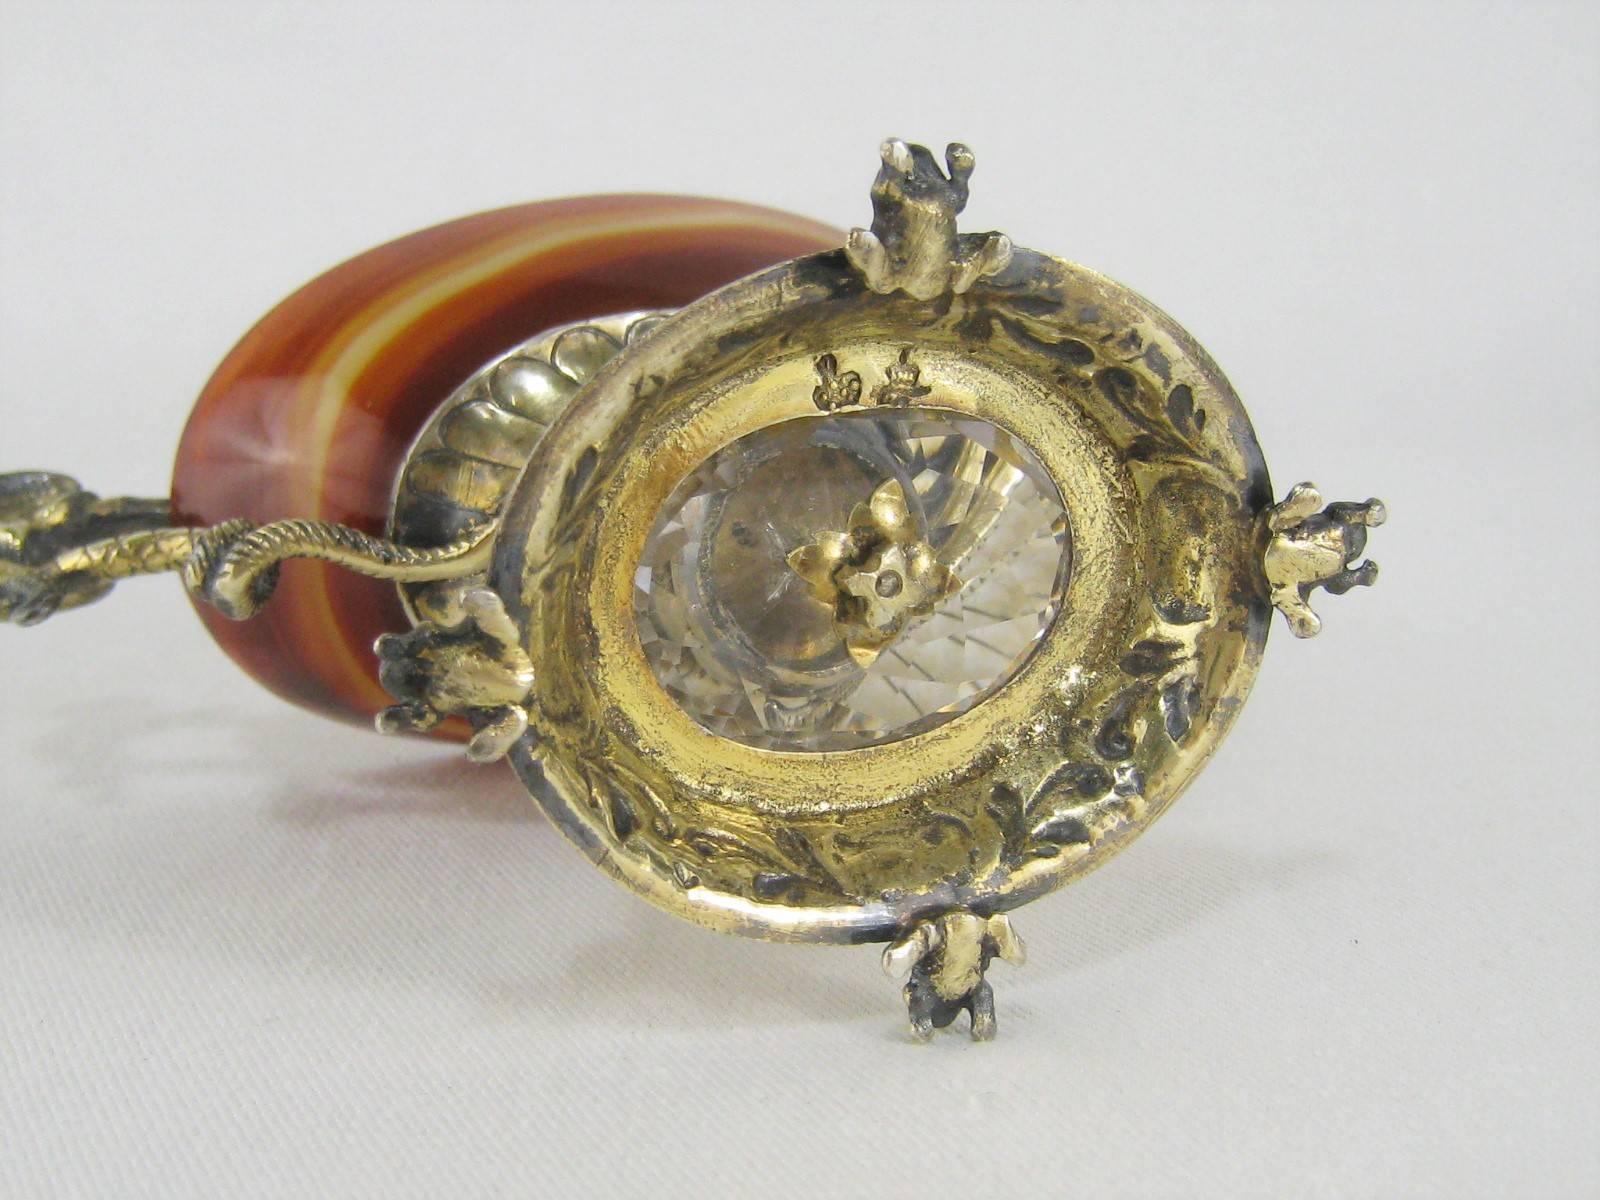 Early 20th Century Silver Mounted Agate Pedestal Dish with Serpents and Frogs Antique Salt Cellar For Sale